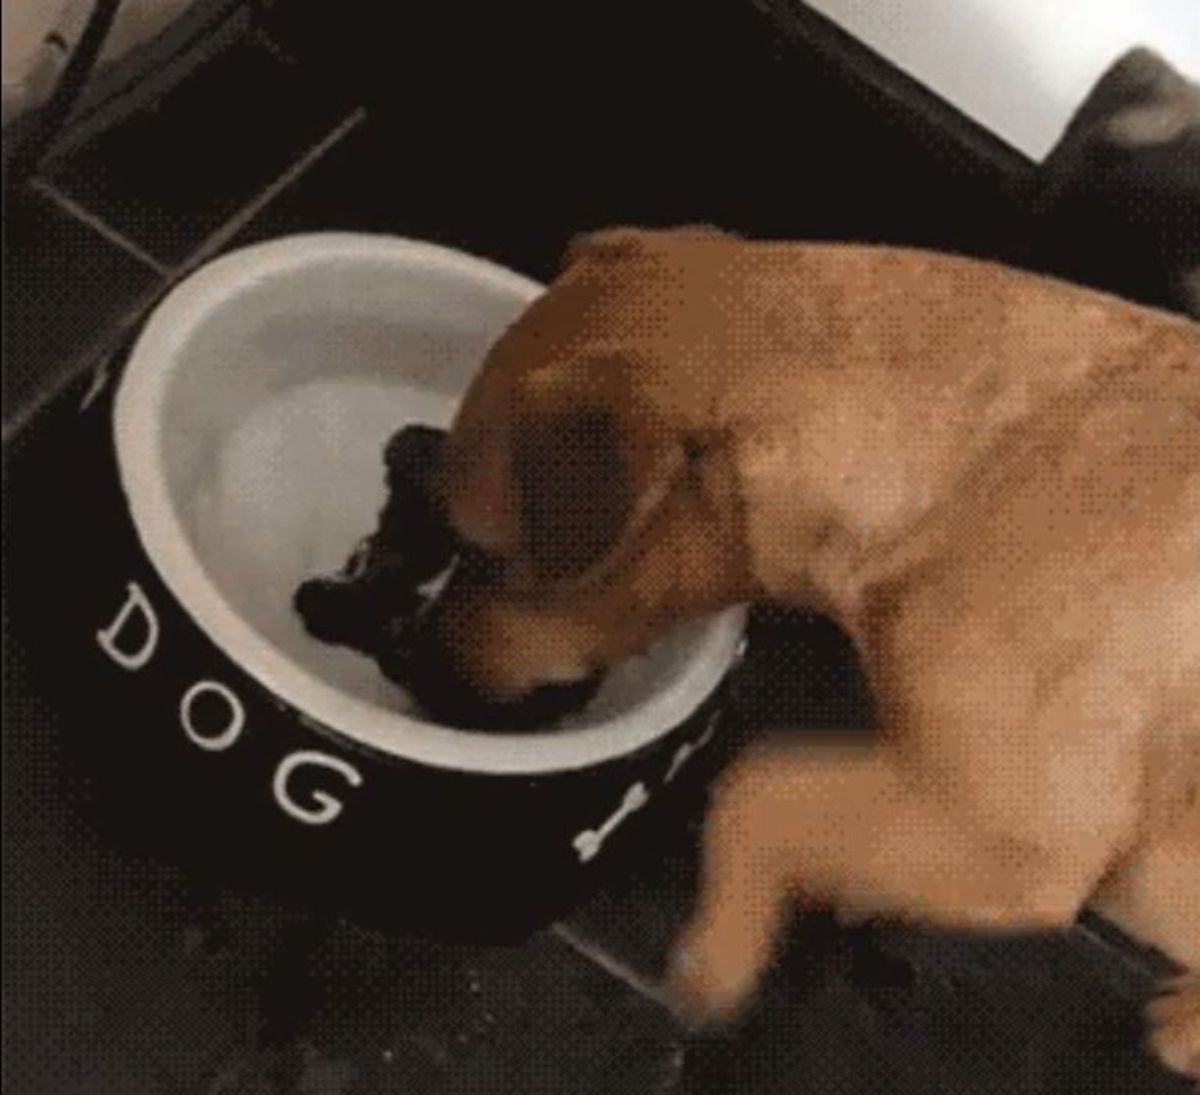 brown dog trying to eat the printed brown bone at the bottom of a white bowl filled with water